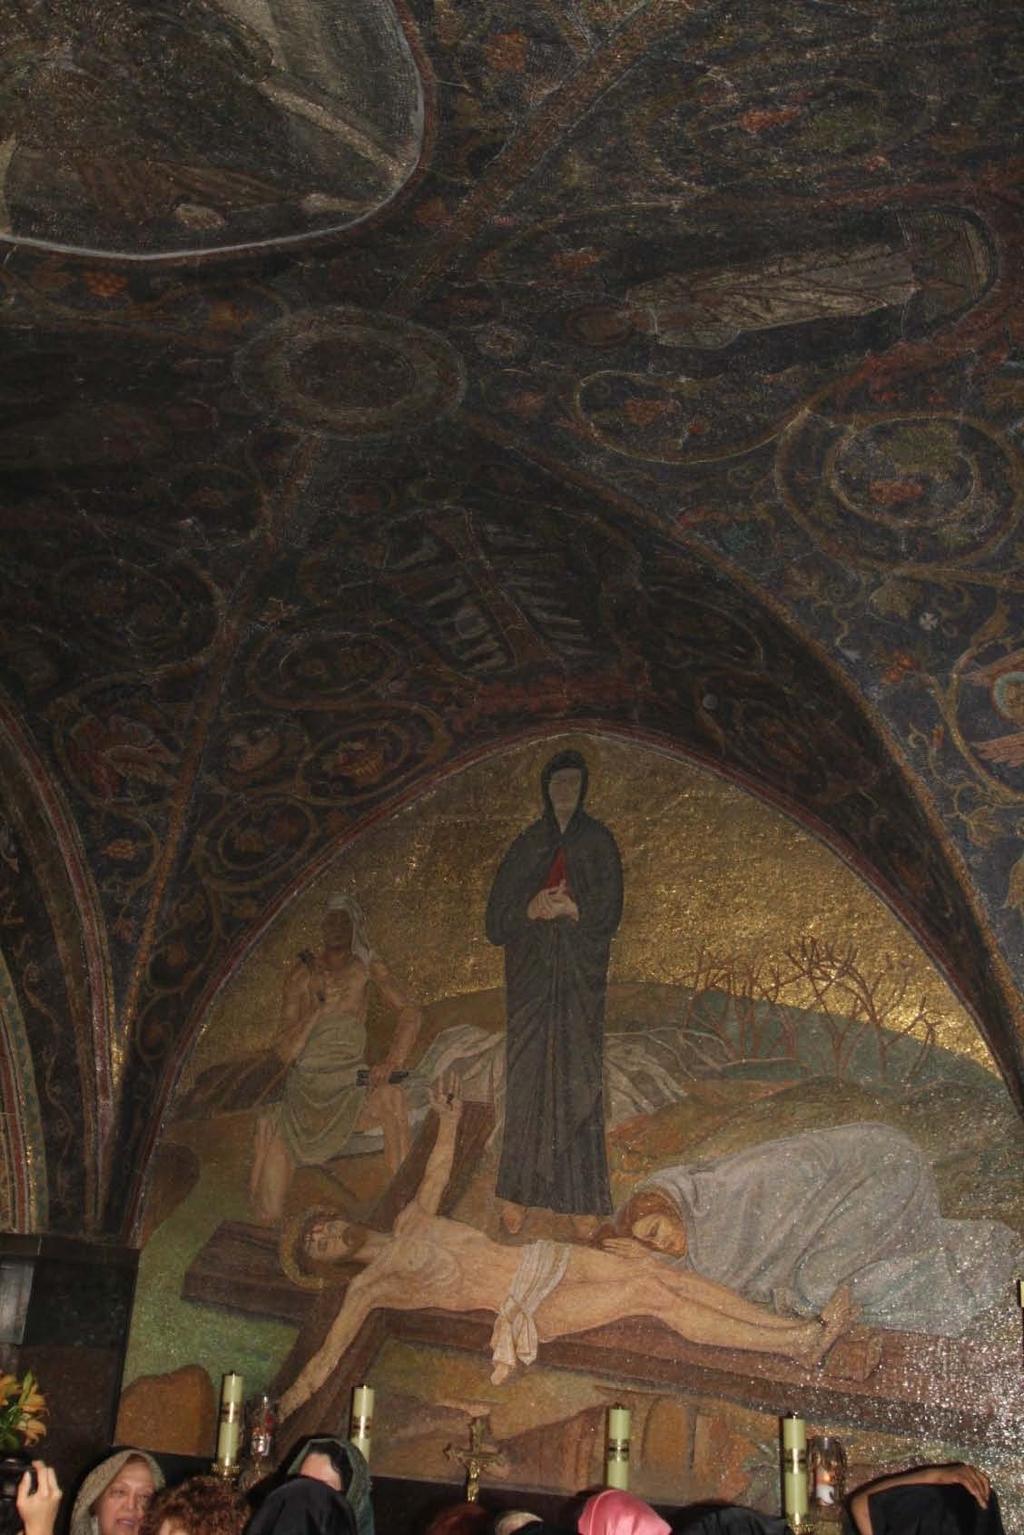 The mosaic in the Holy